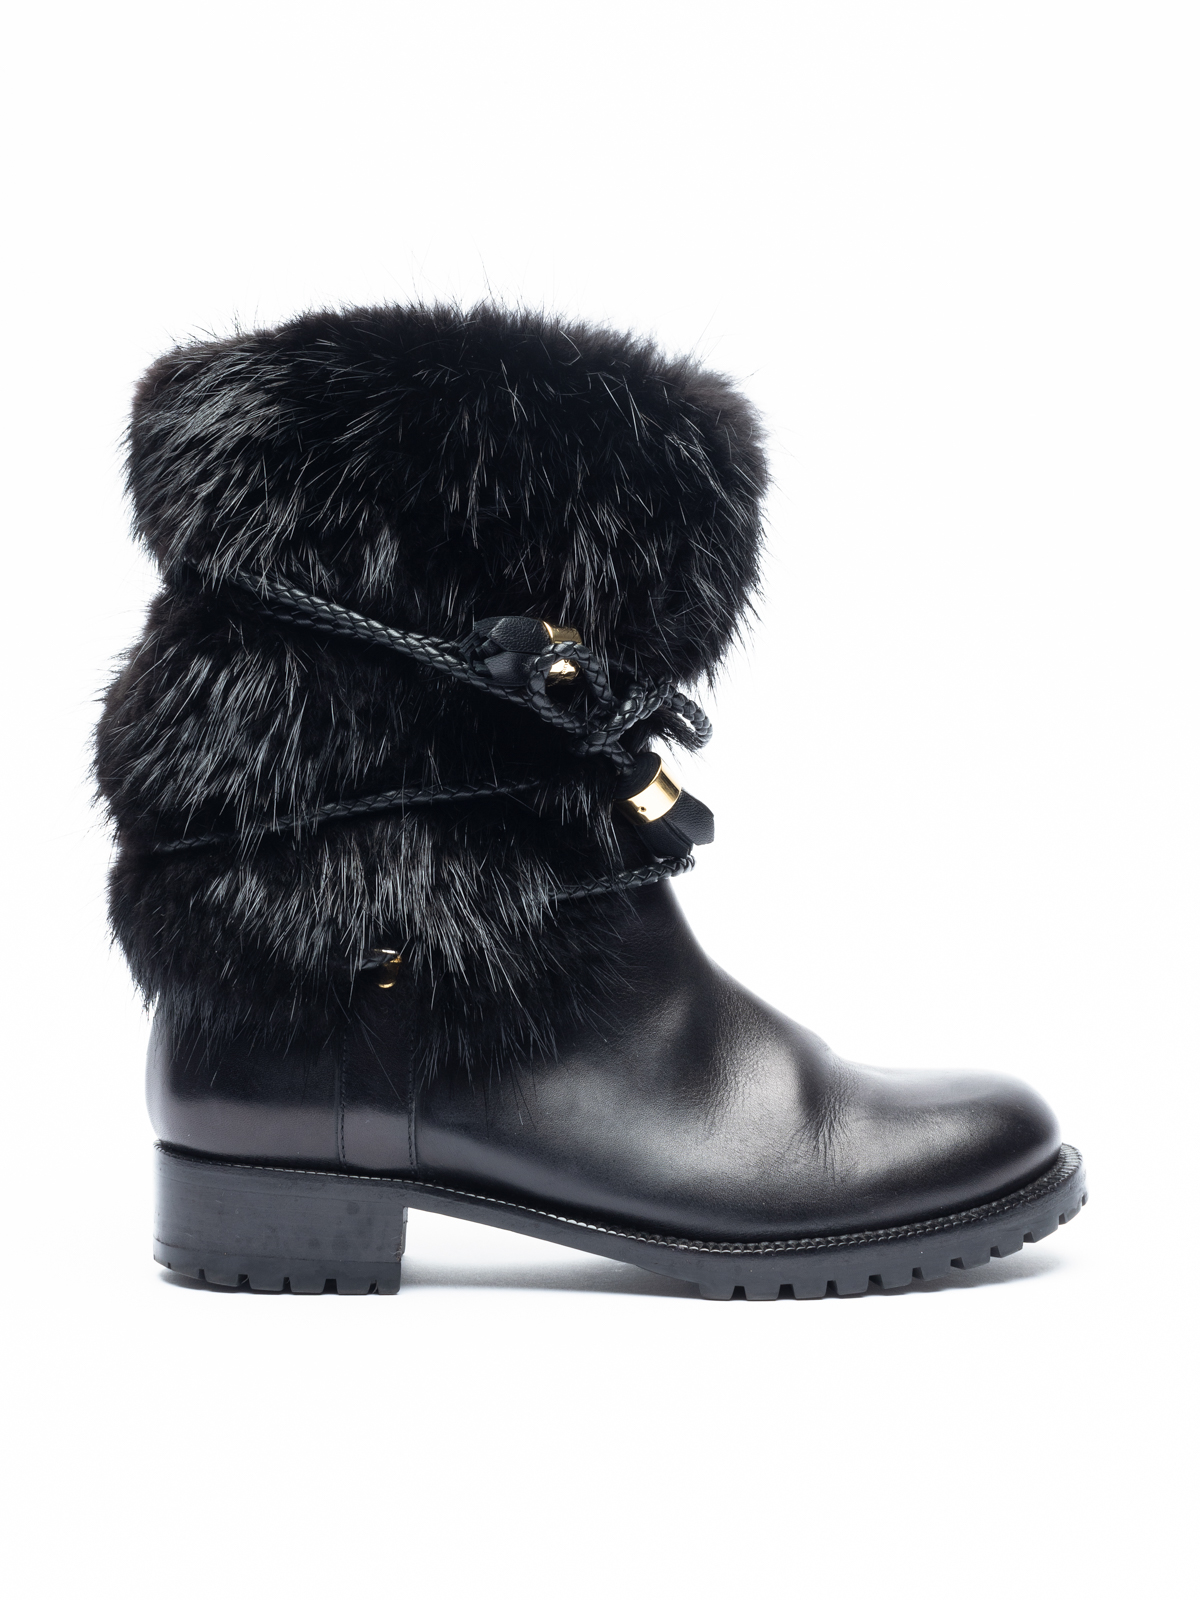 Louis Vuitton, Black Boots, Leather and Fox Fur